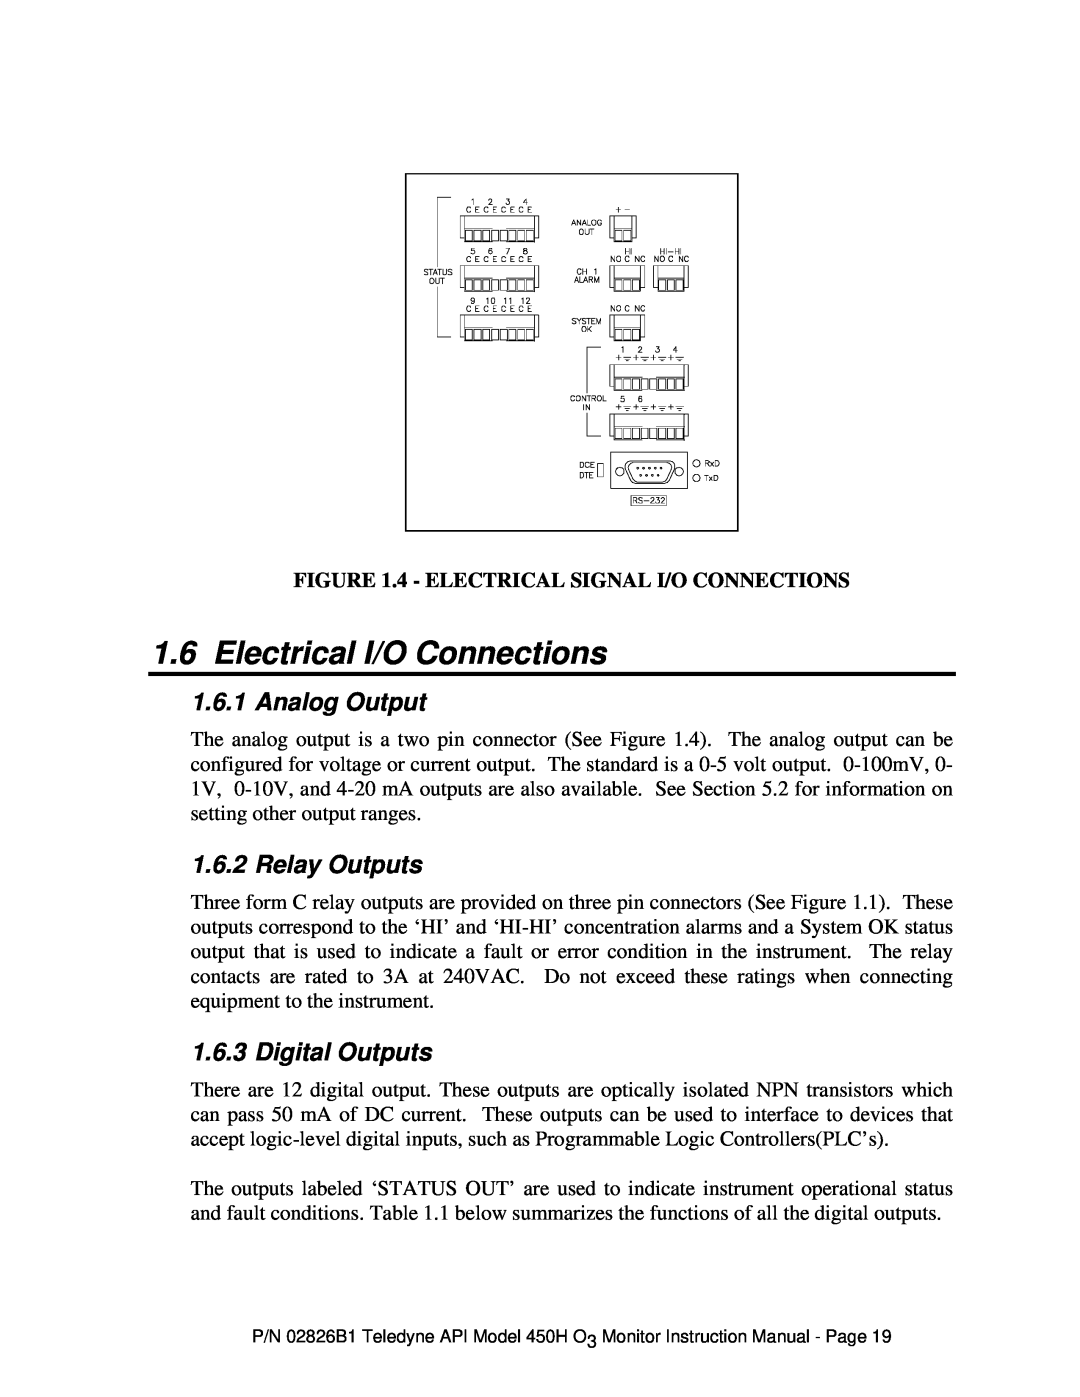 Teledyne 450H instruction manual 1.6Electrical I/O Connections, 1.6.1Analog Output, Relay Outputs, Digital Outputs 